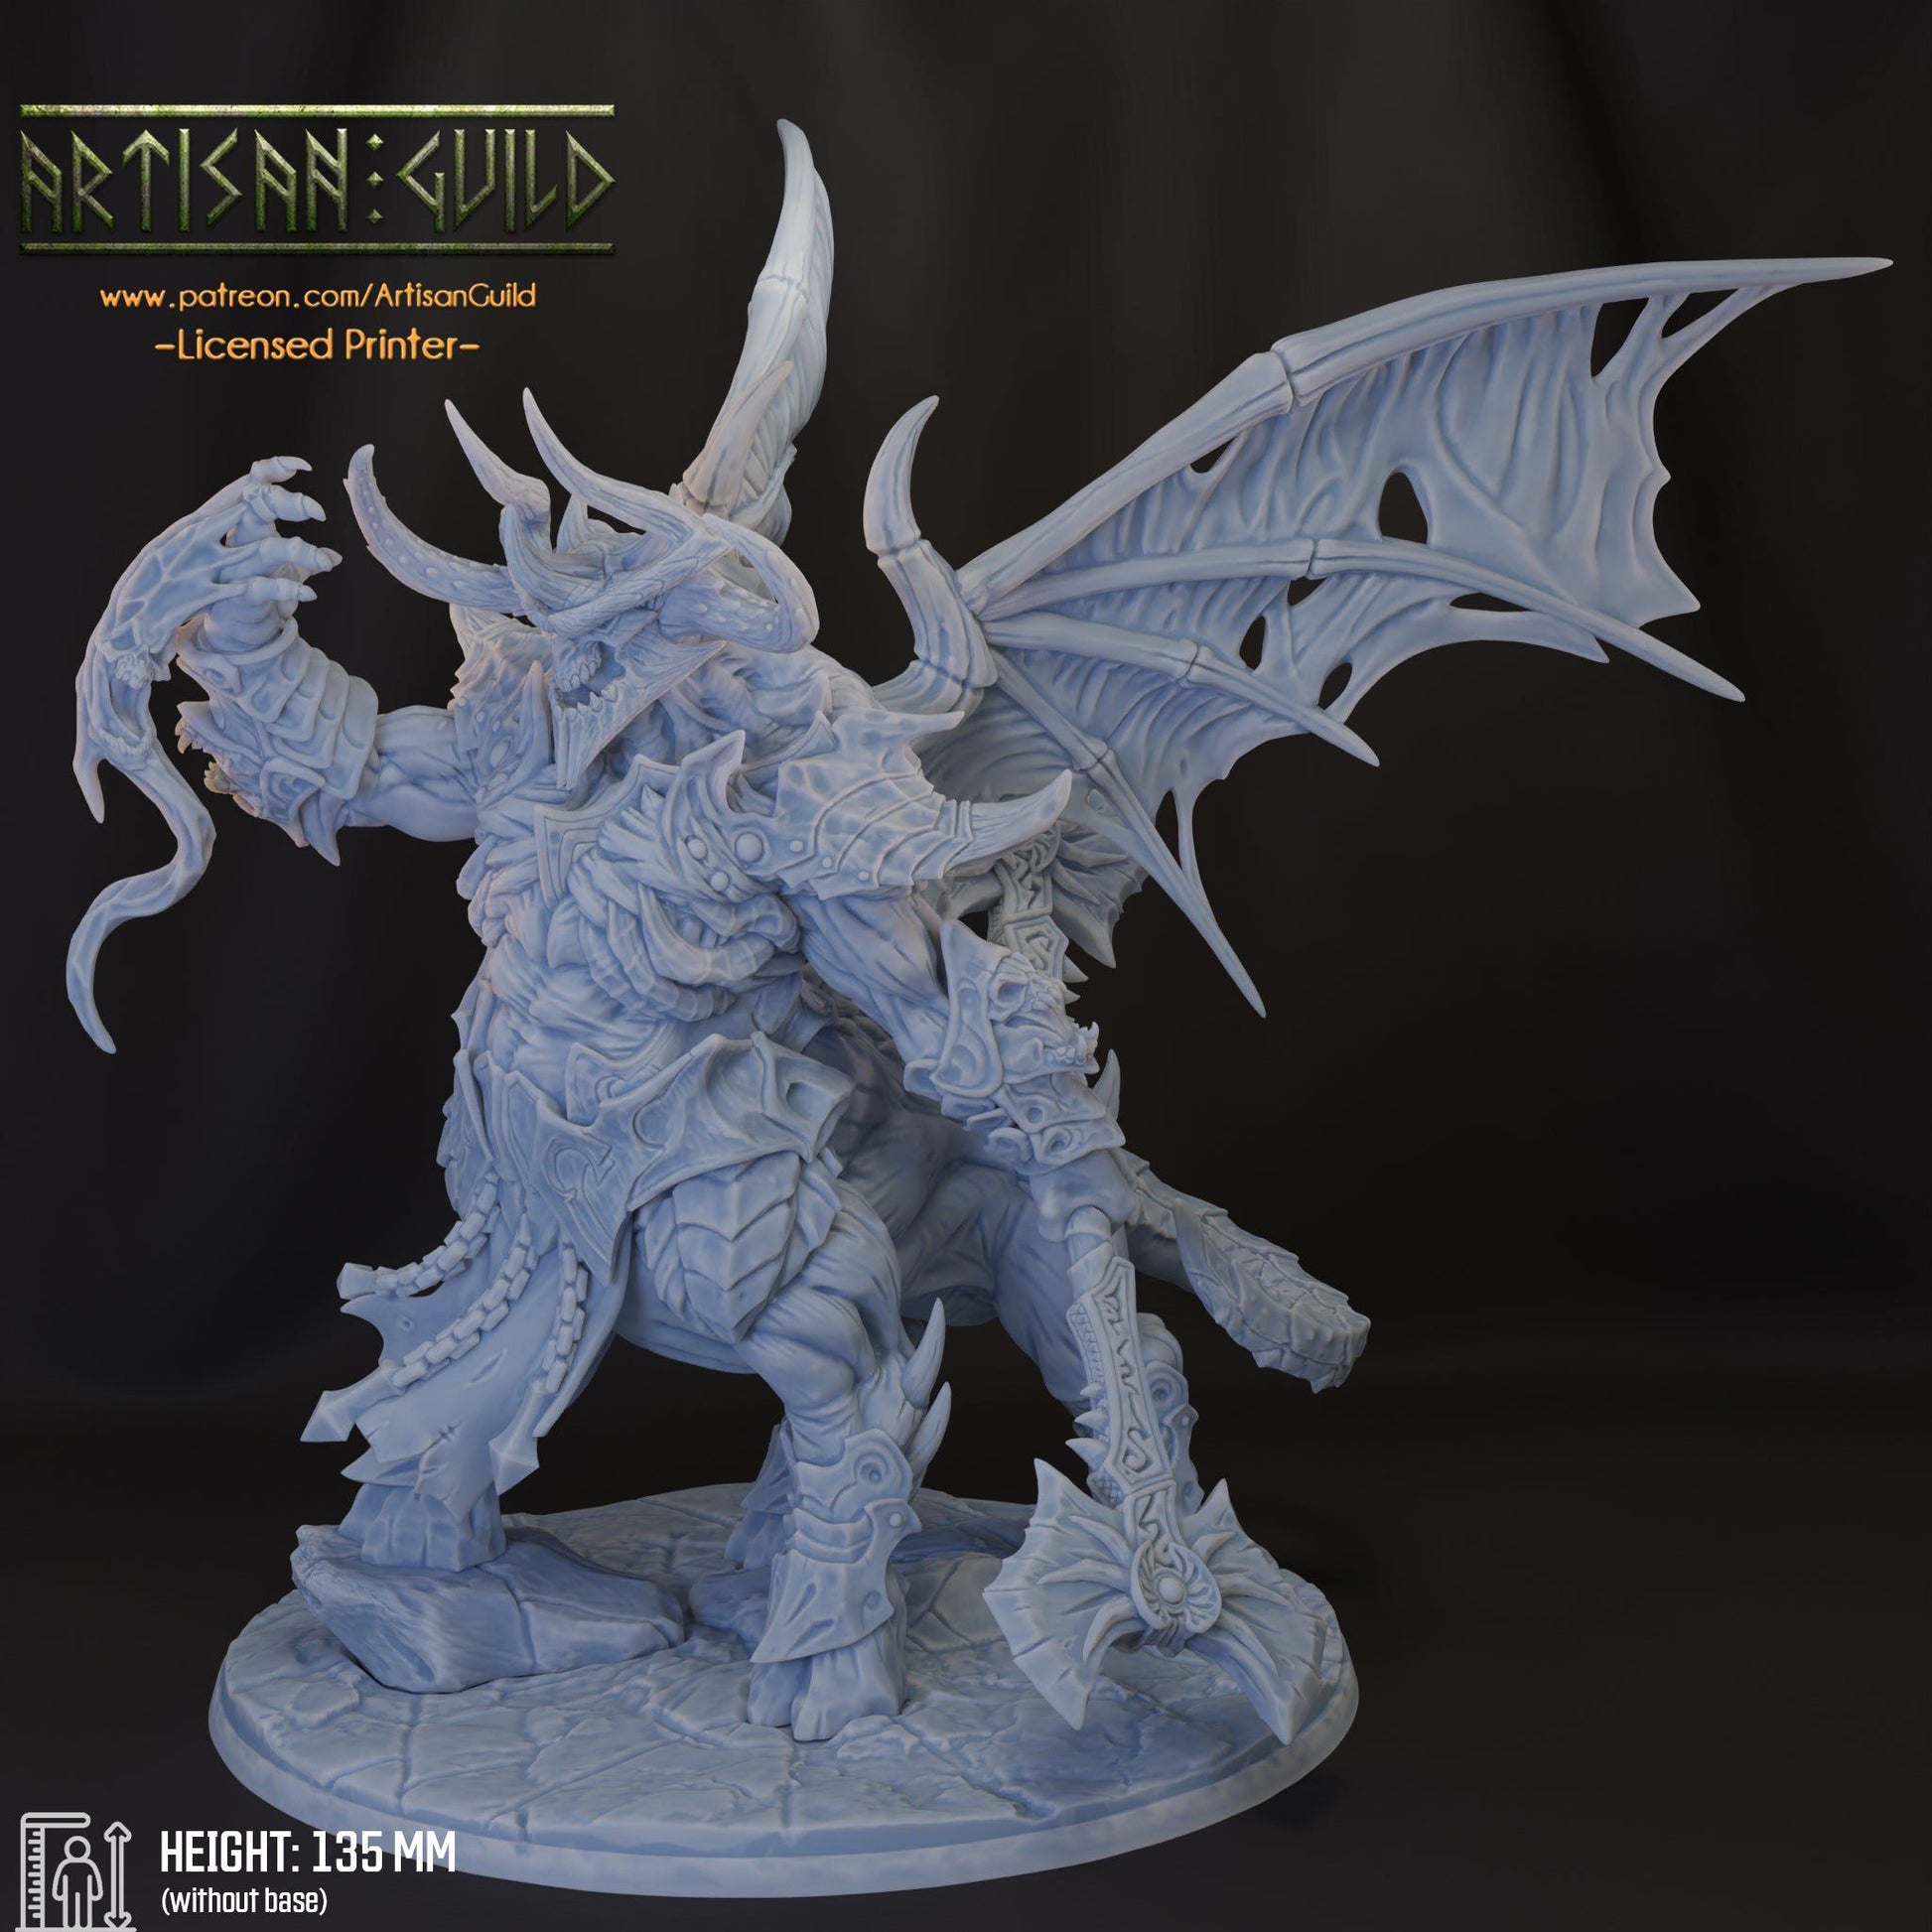 Astaroth the Soulforged ‧ Artisan Guild ‧ 32mm.